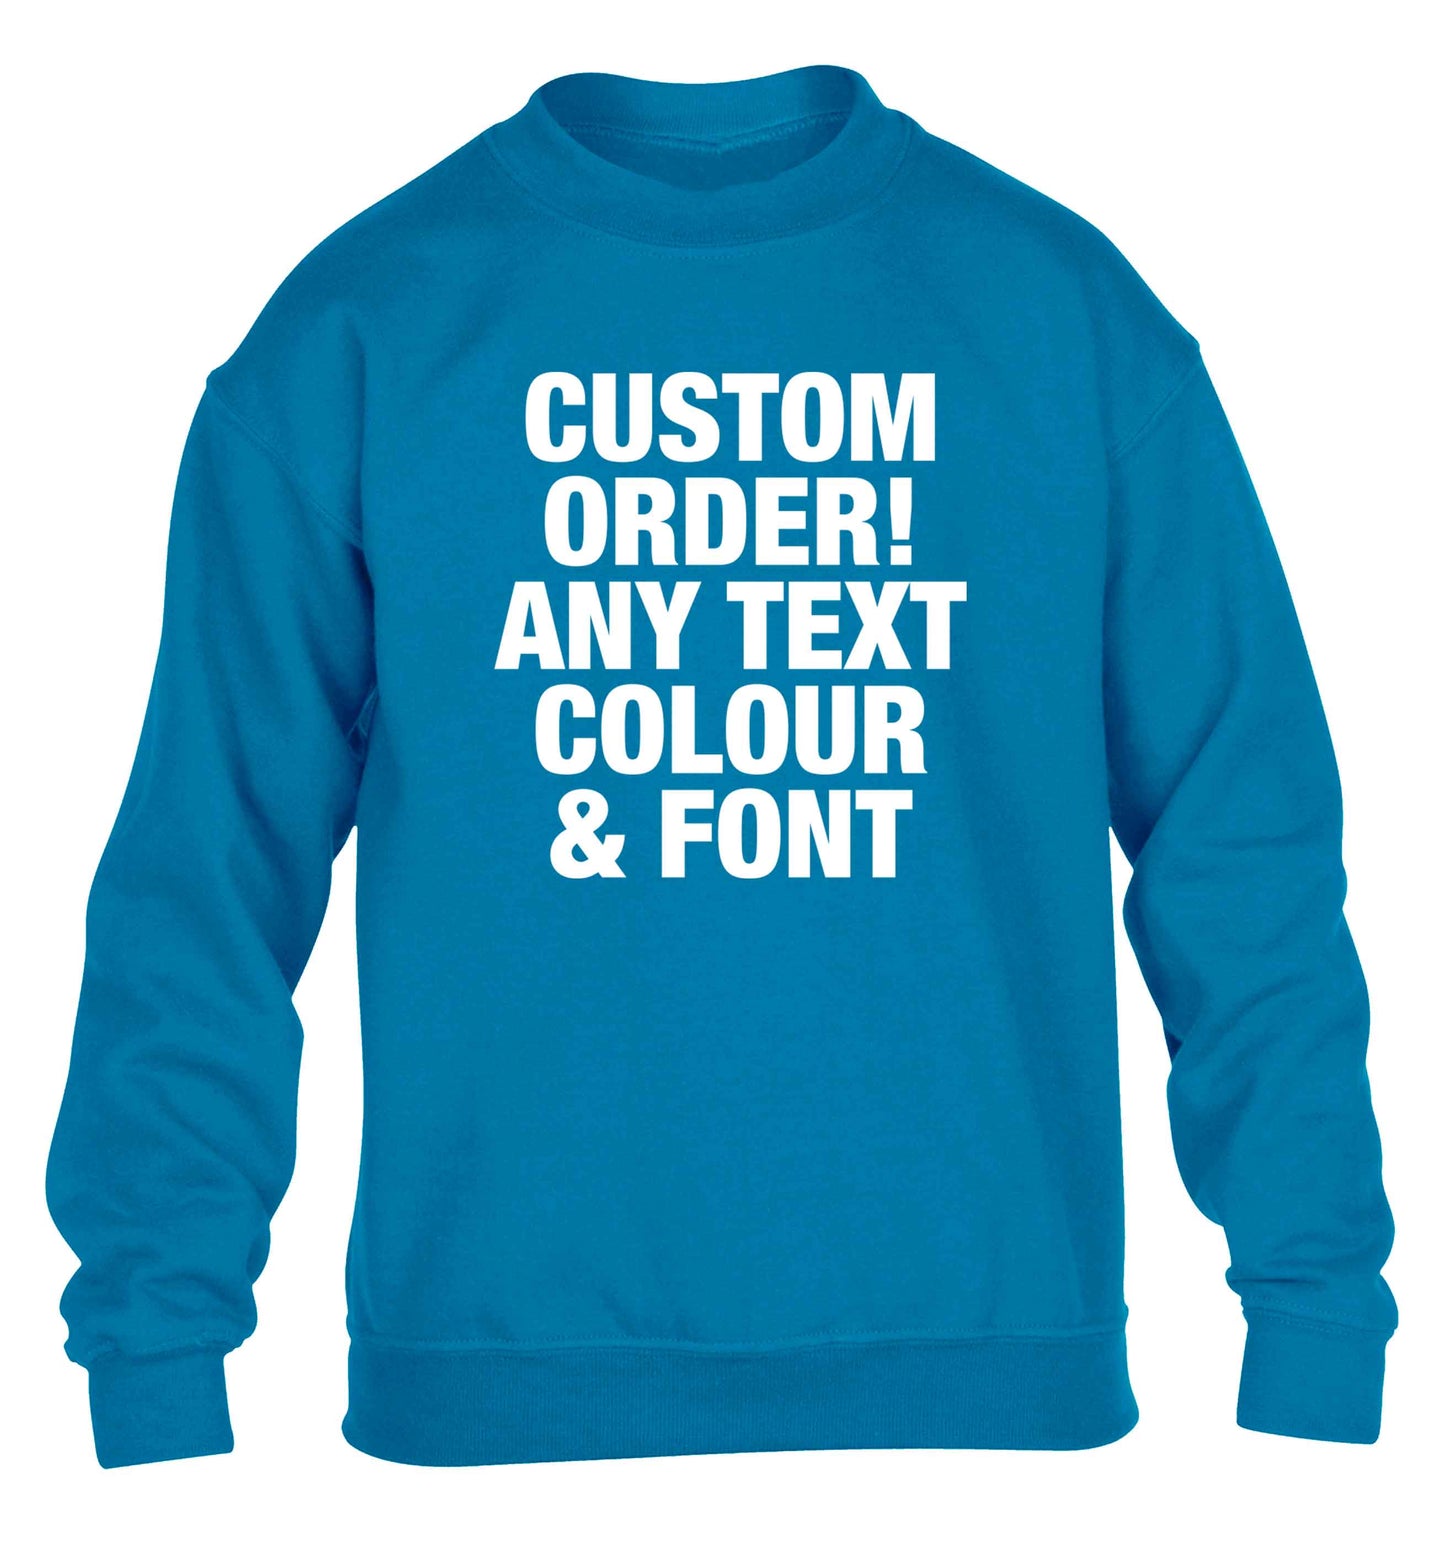 Custom order any text colour and font children's blue sweater 12-13 Years